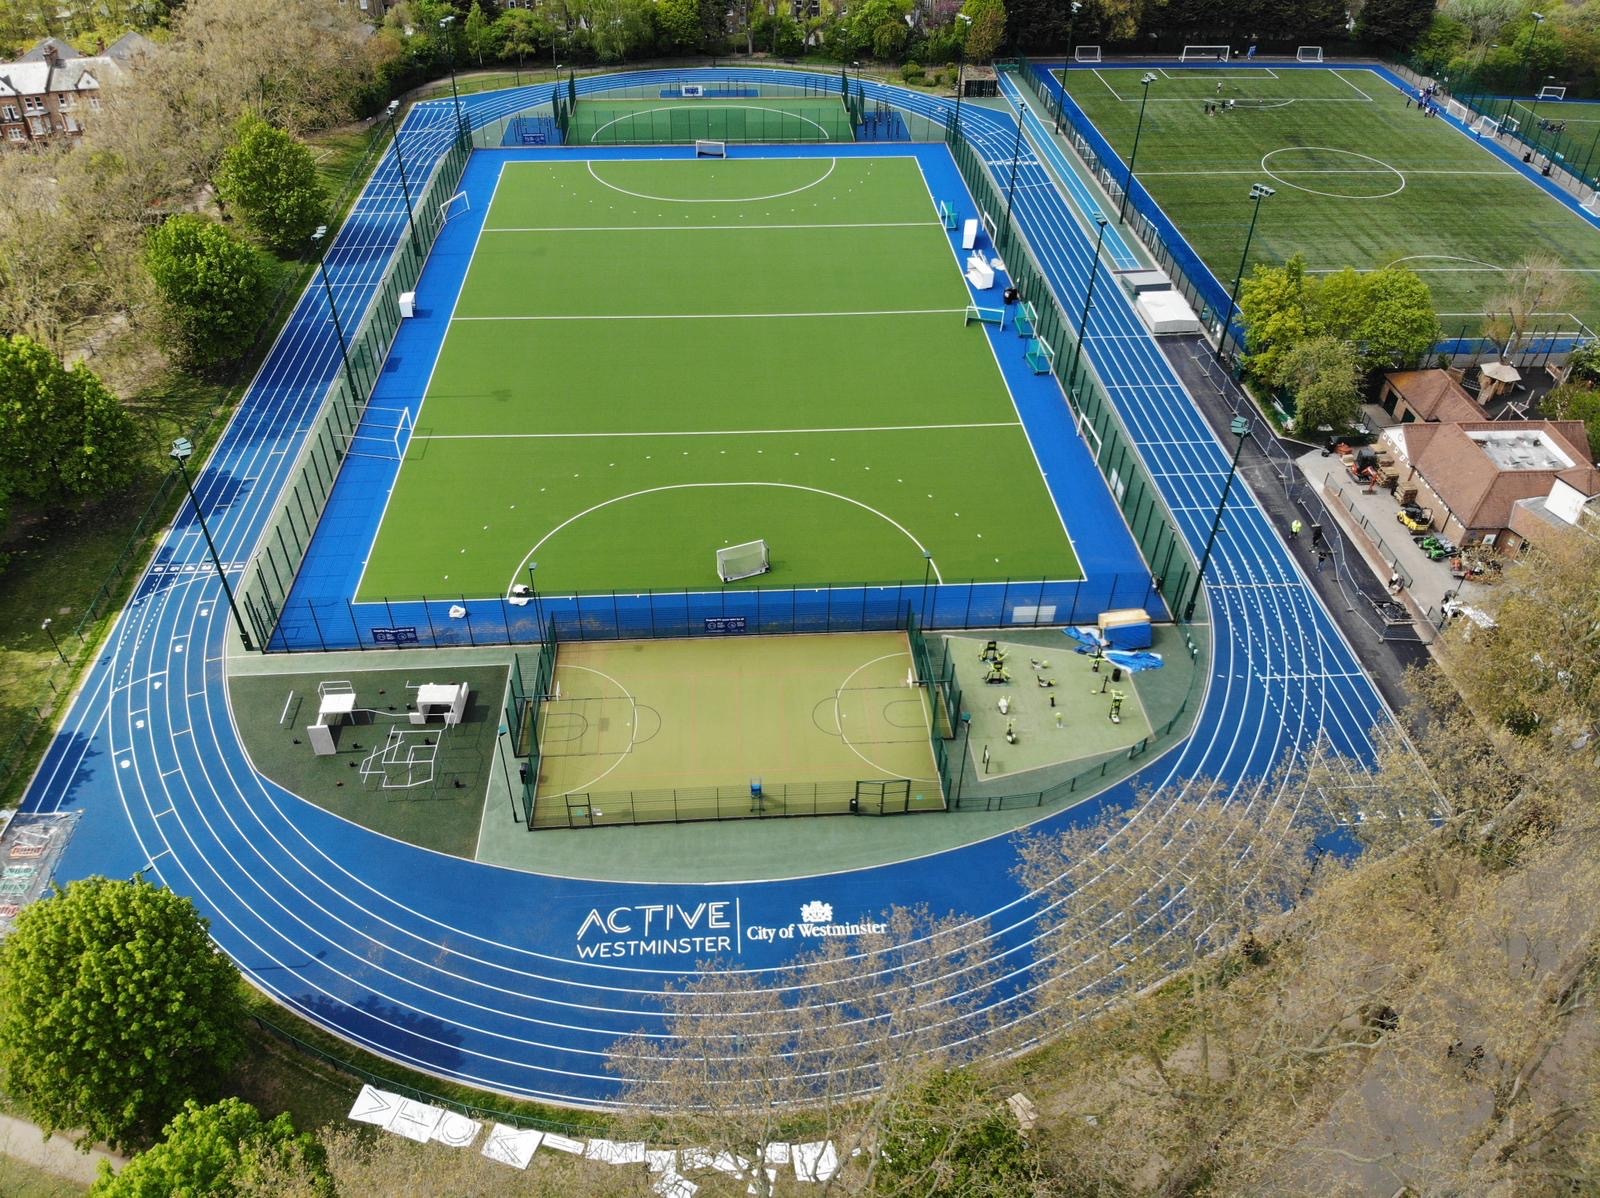 Paddington Recreation Ground adds this new running track surface to many other top standard facilities, including a full size 3G football pitch.